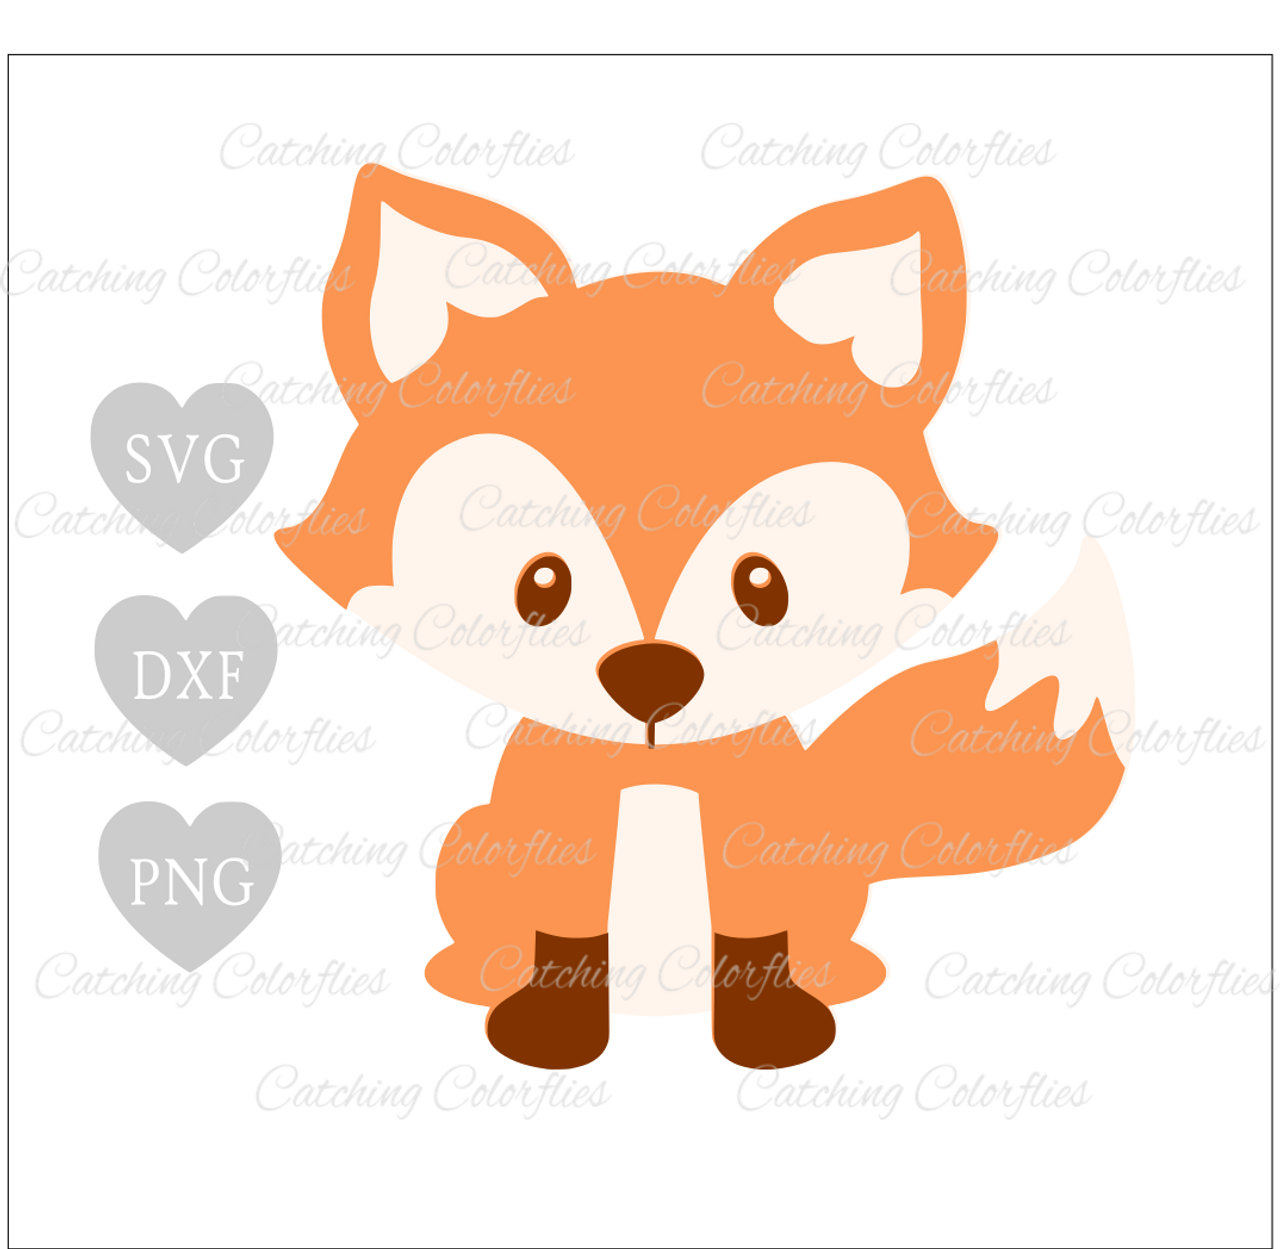 Download Cute Baby Fox Svg Catching Colorflies